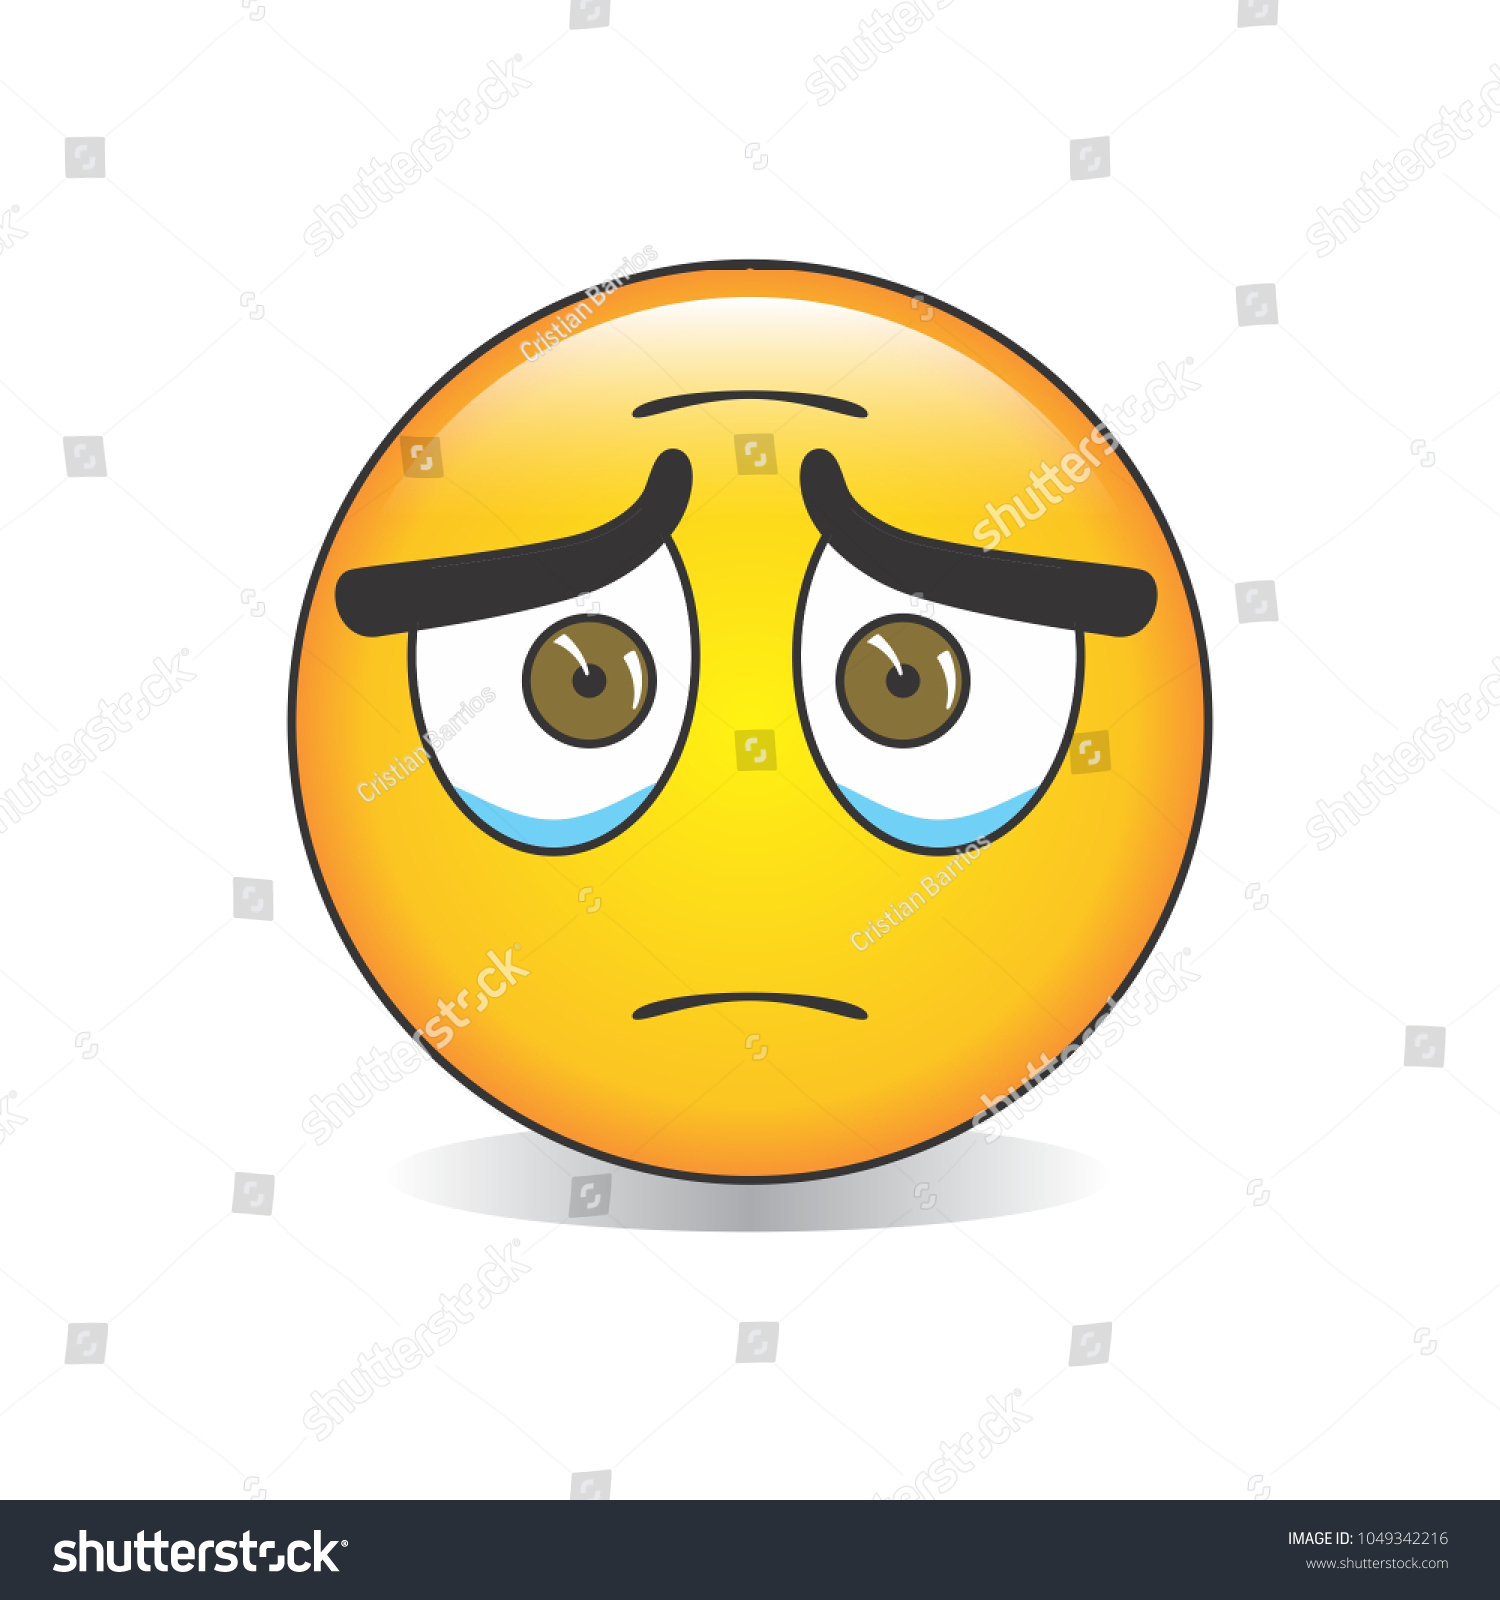 Sad Face Emoji Vector Stock Vector Royalty Free 1049342216 Shutterstock Hot Sex Picture 4988